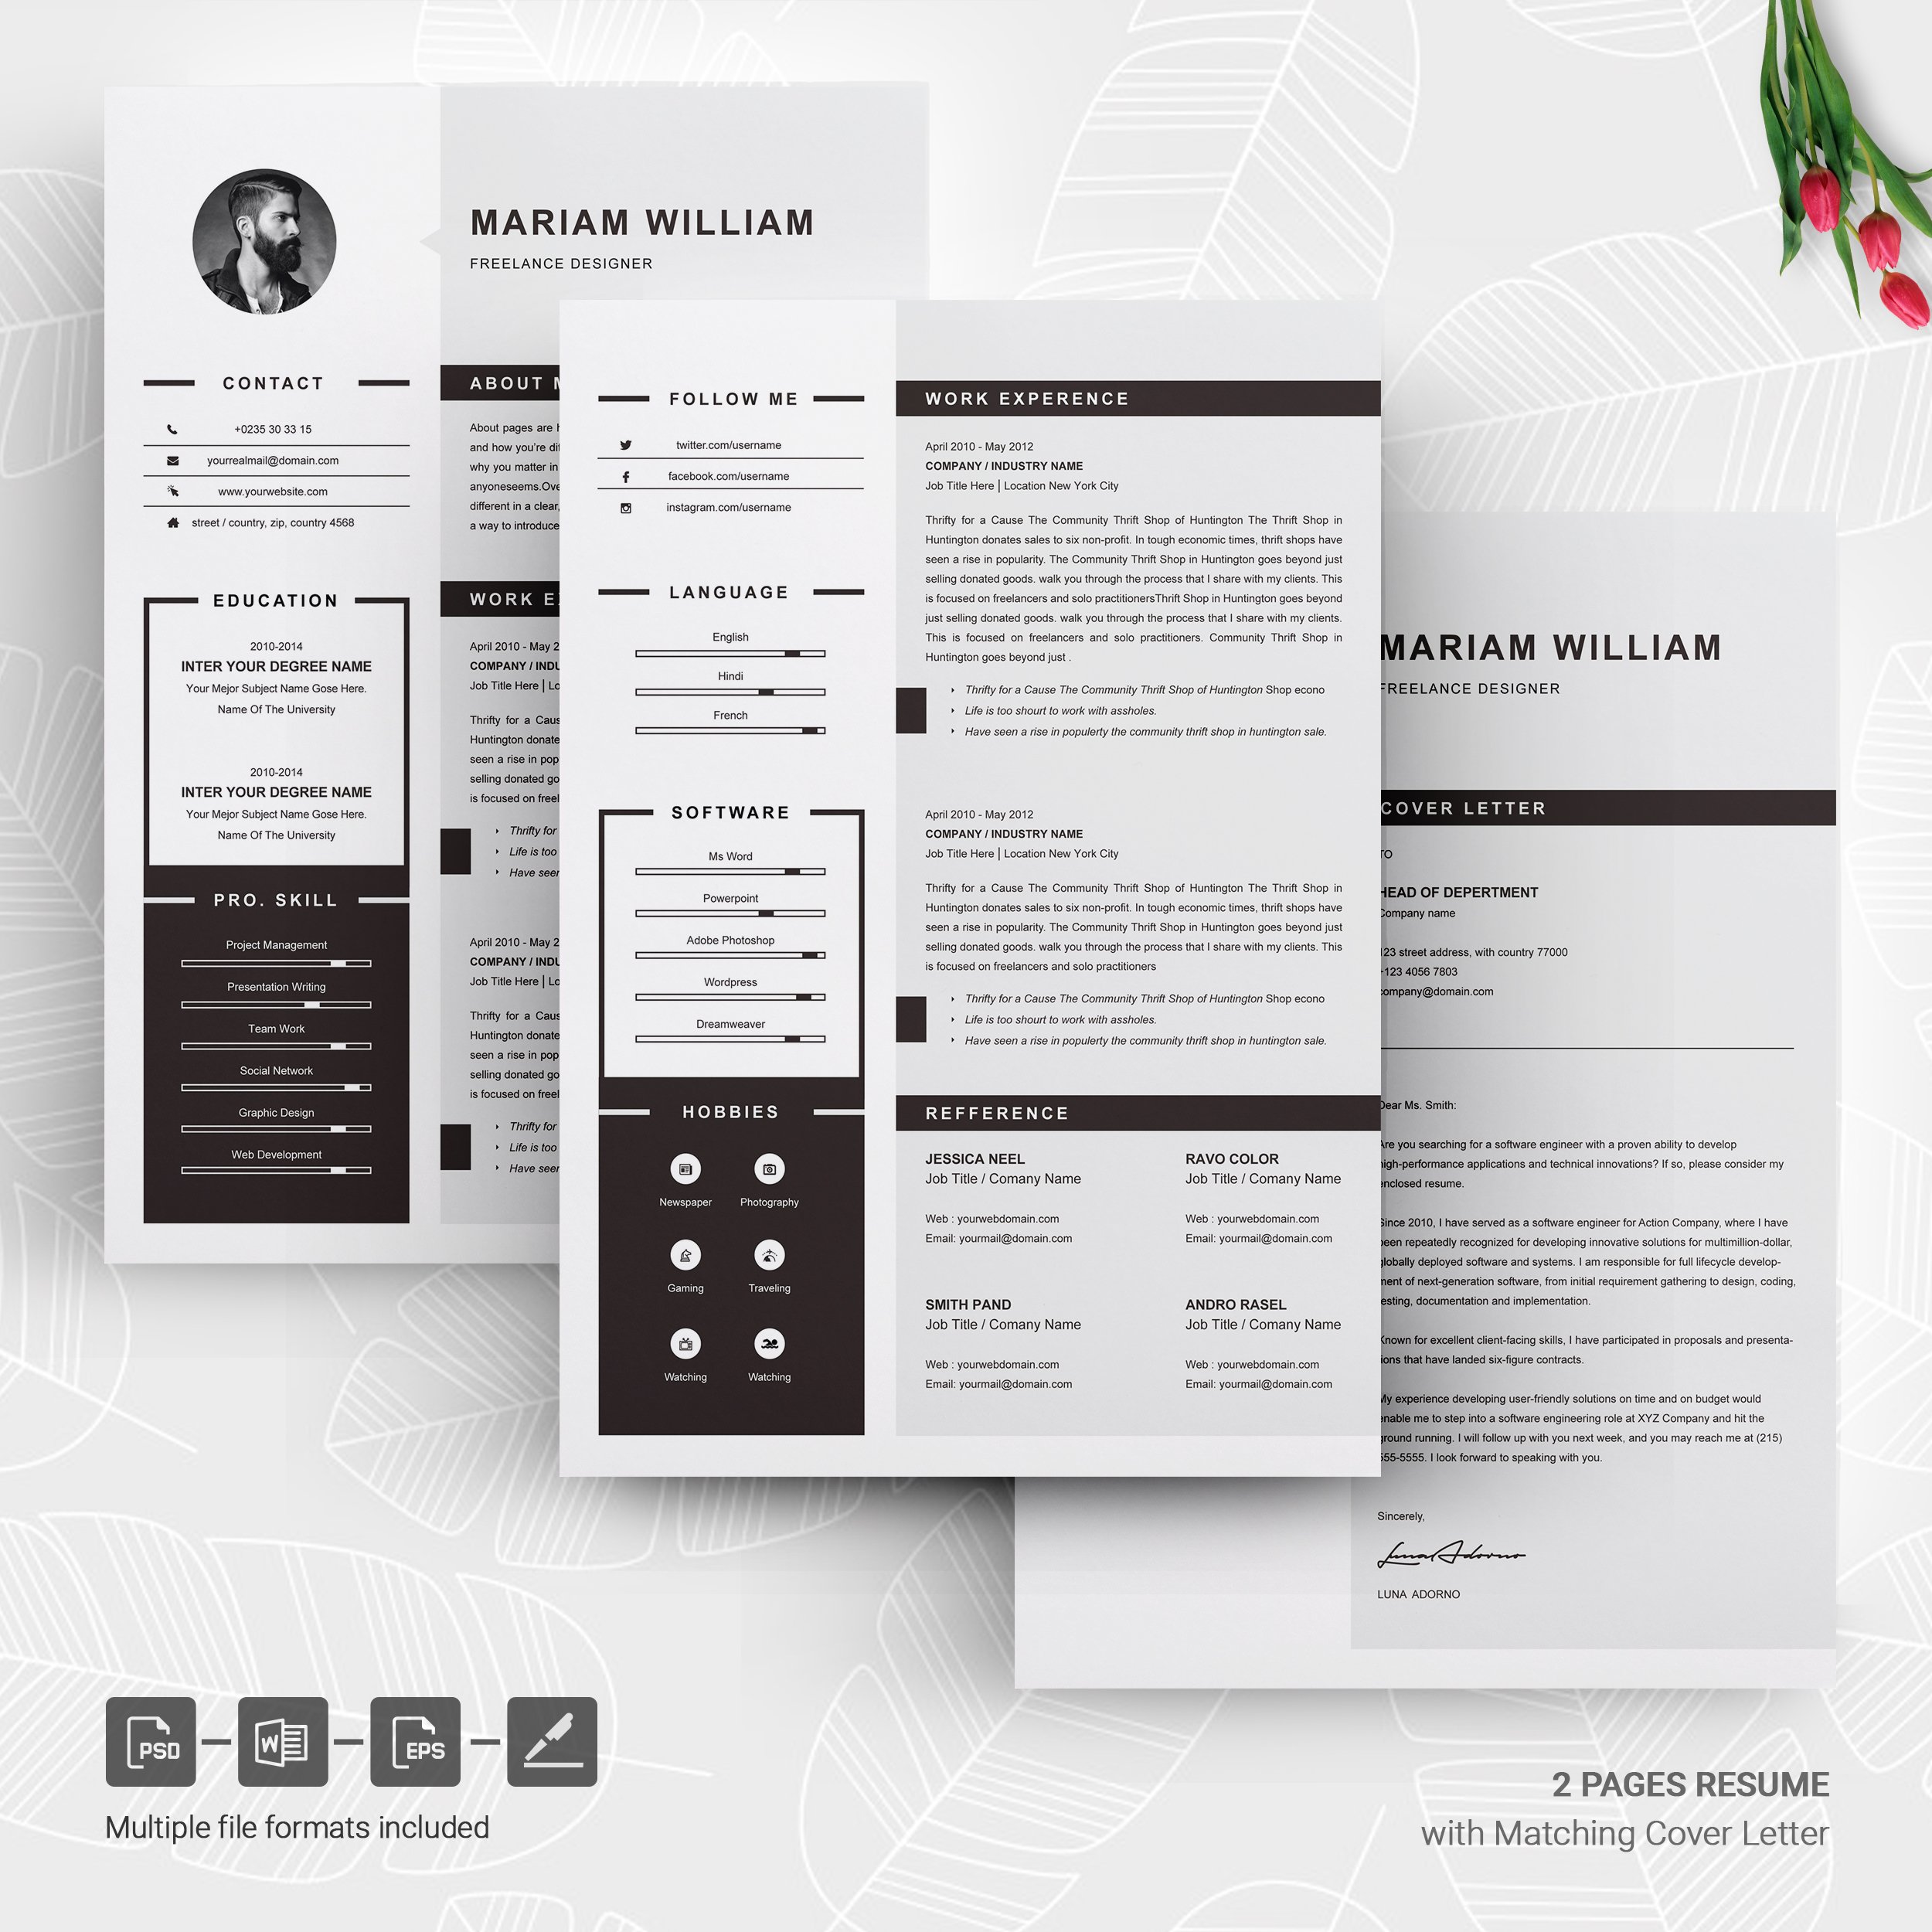 05 page free resume design template 970